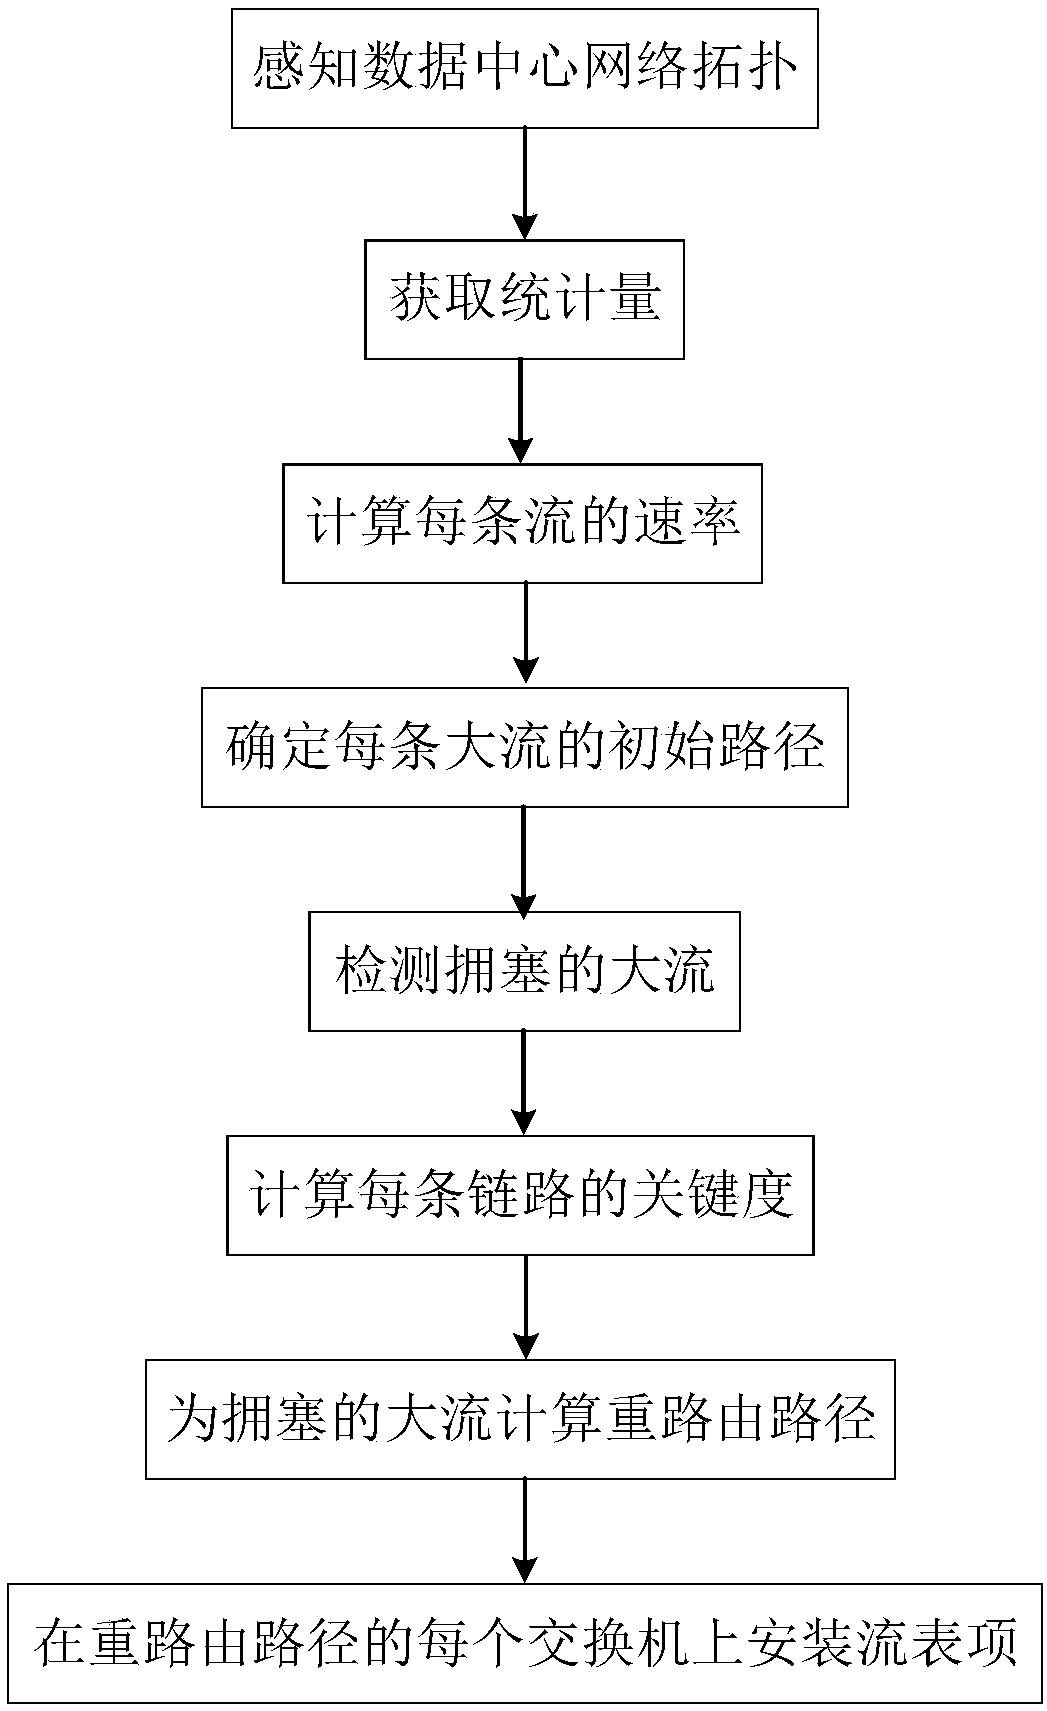 SDN data center network congestion control method based on rerouting